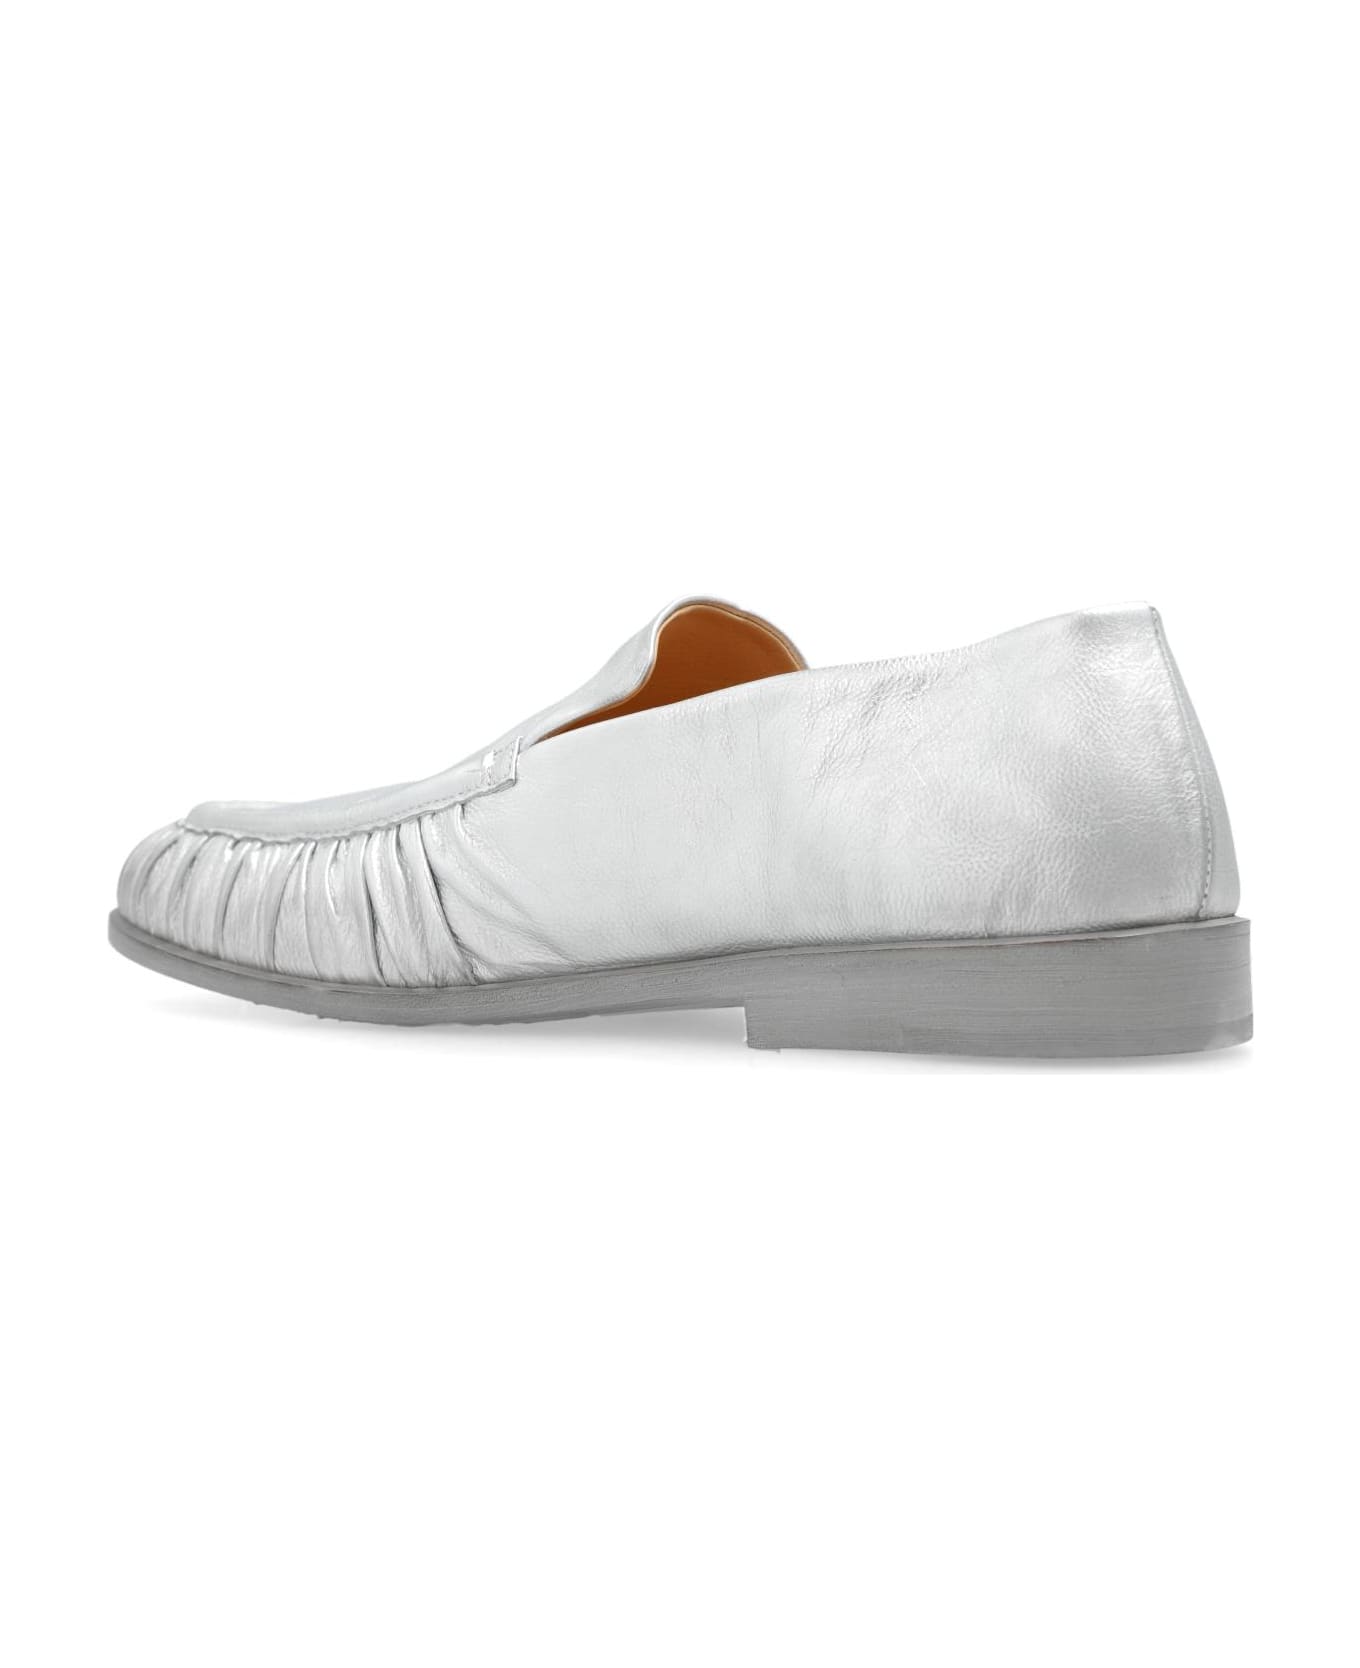 Marsell 'mocassino' Loafers - Silver